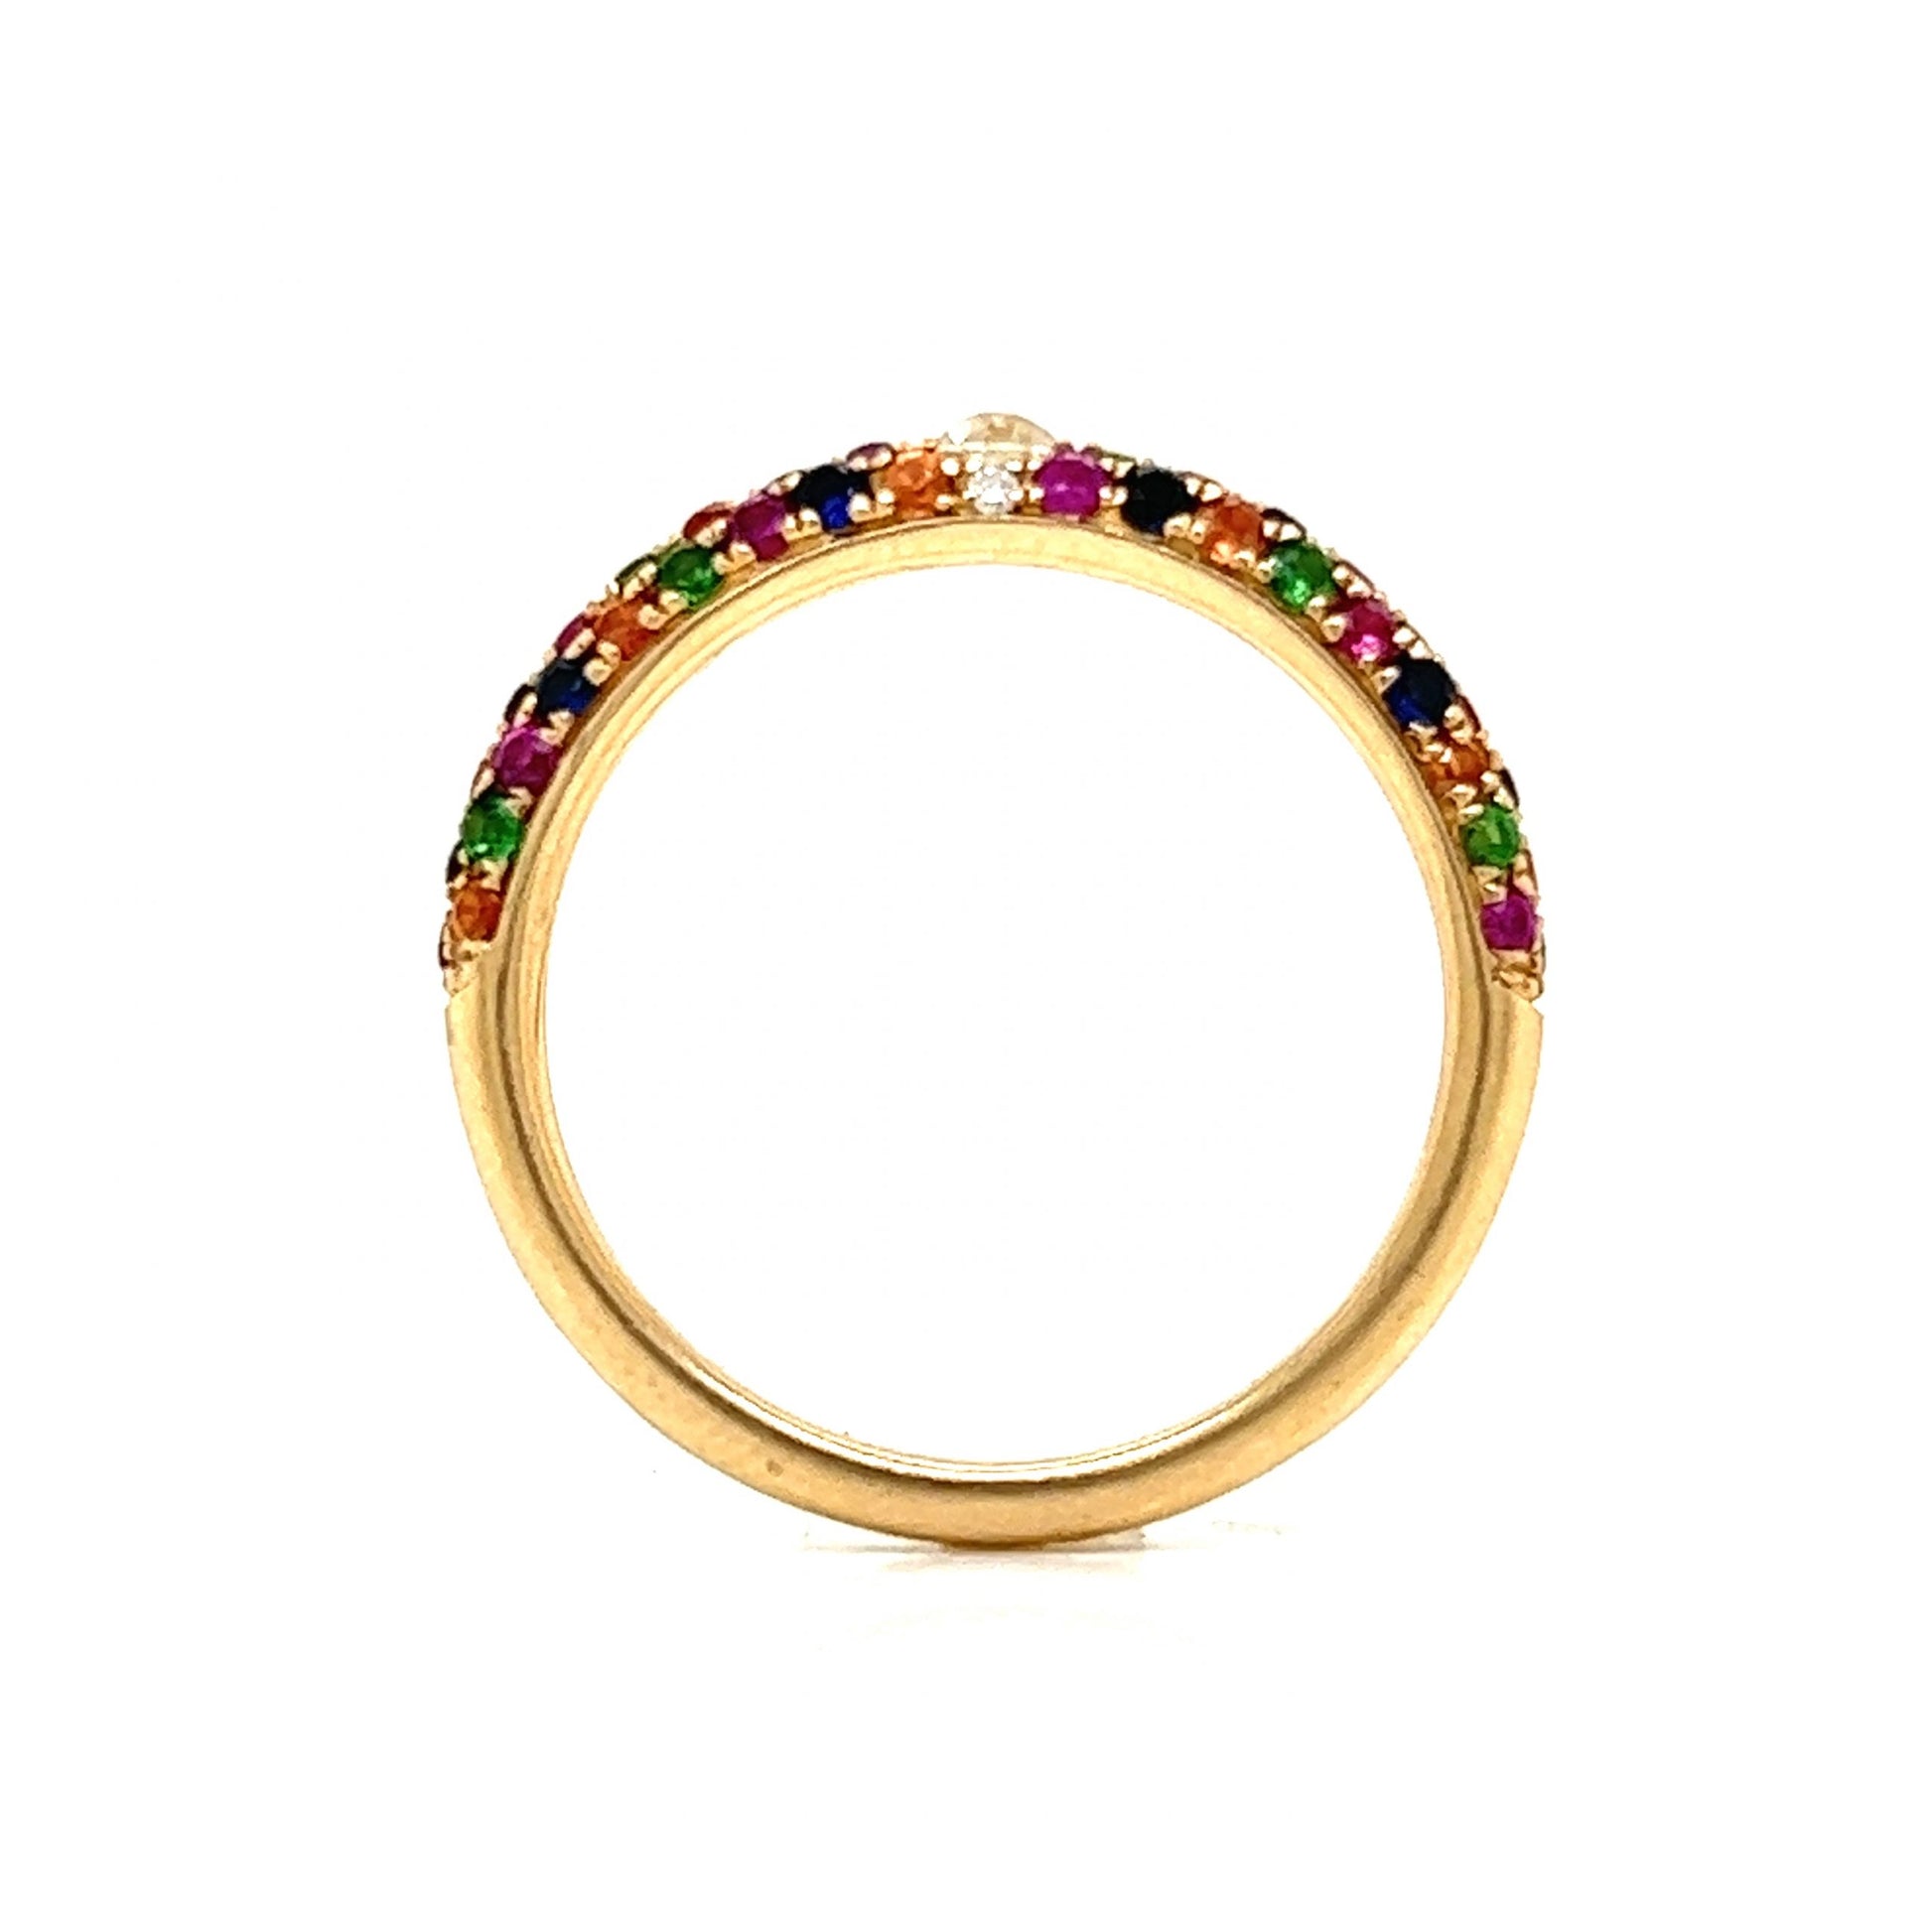 Multicolor Sapphire & Diamond Band in 14k Yellow GoldComposition: 14 Karat Yellow GoldRing Size: 6.5Total Diamond Weight: .12 ctTotal Gram Weight: 2.3 gInscription: 14k CS.11 SS.01 SO.80